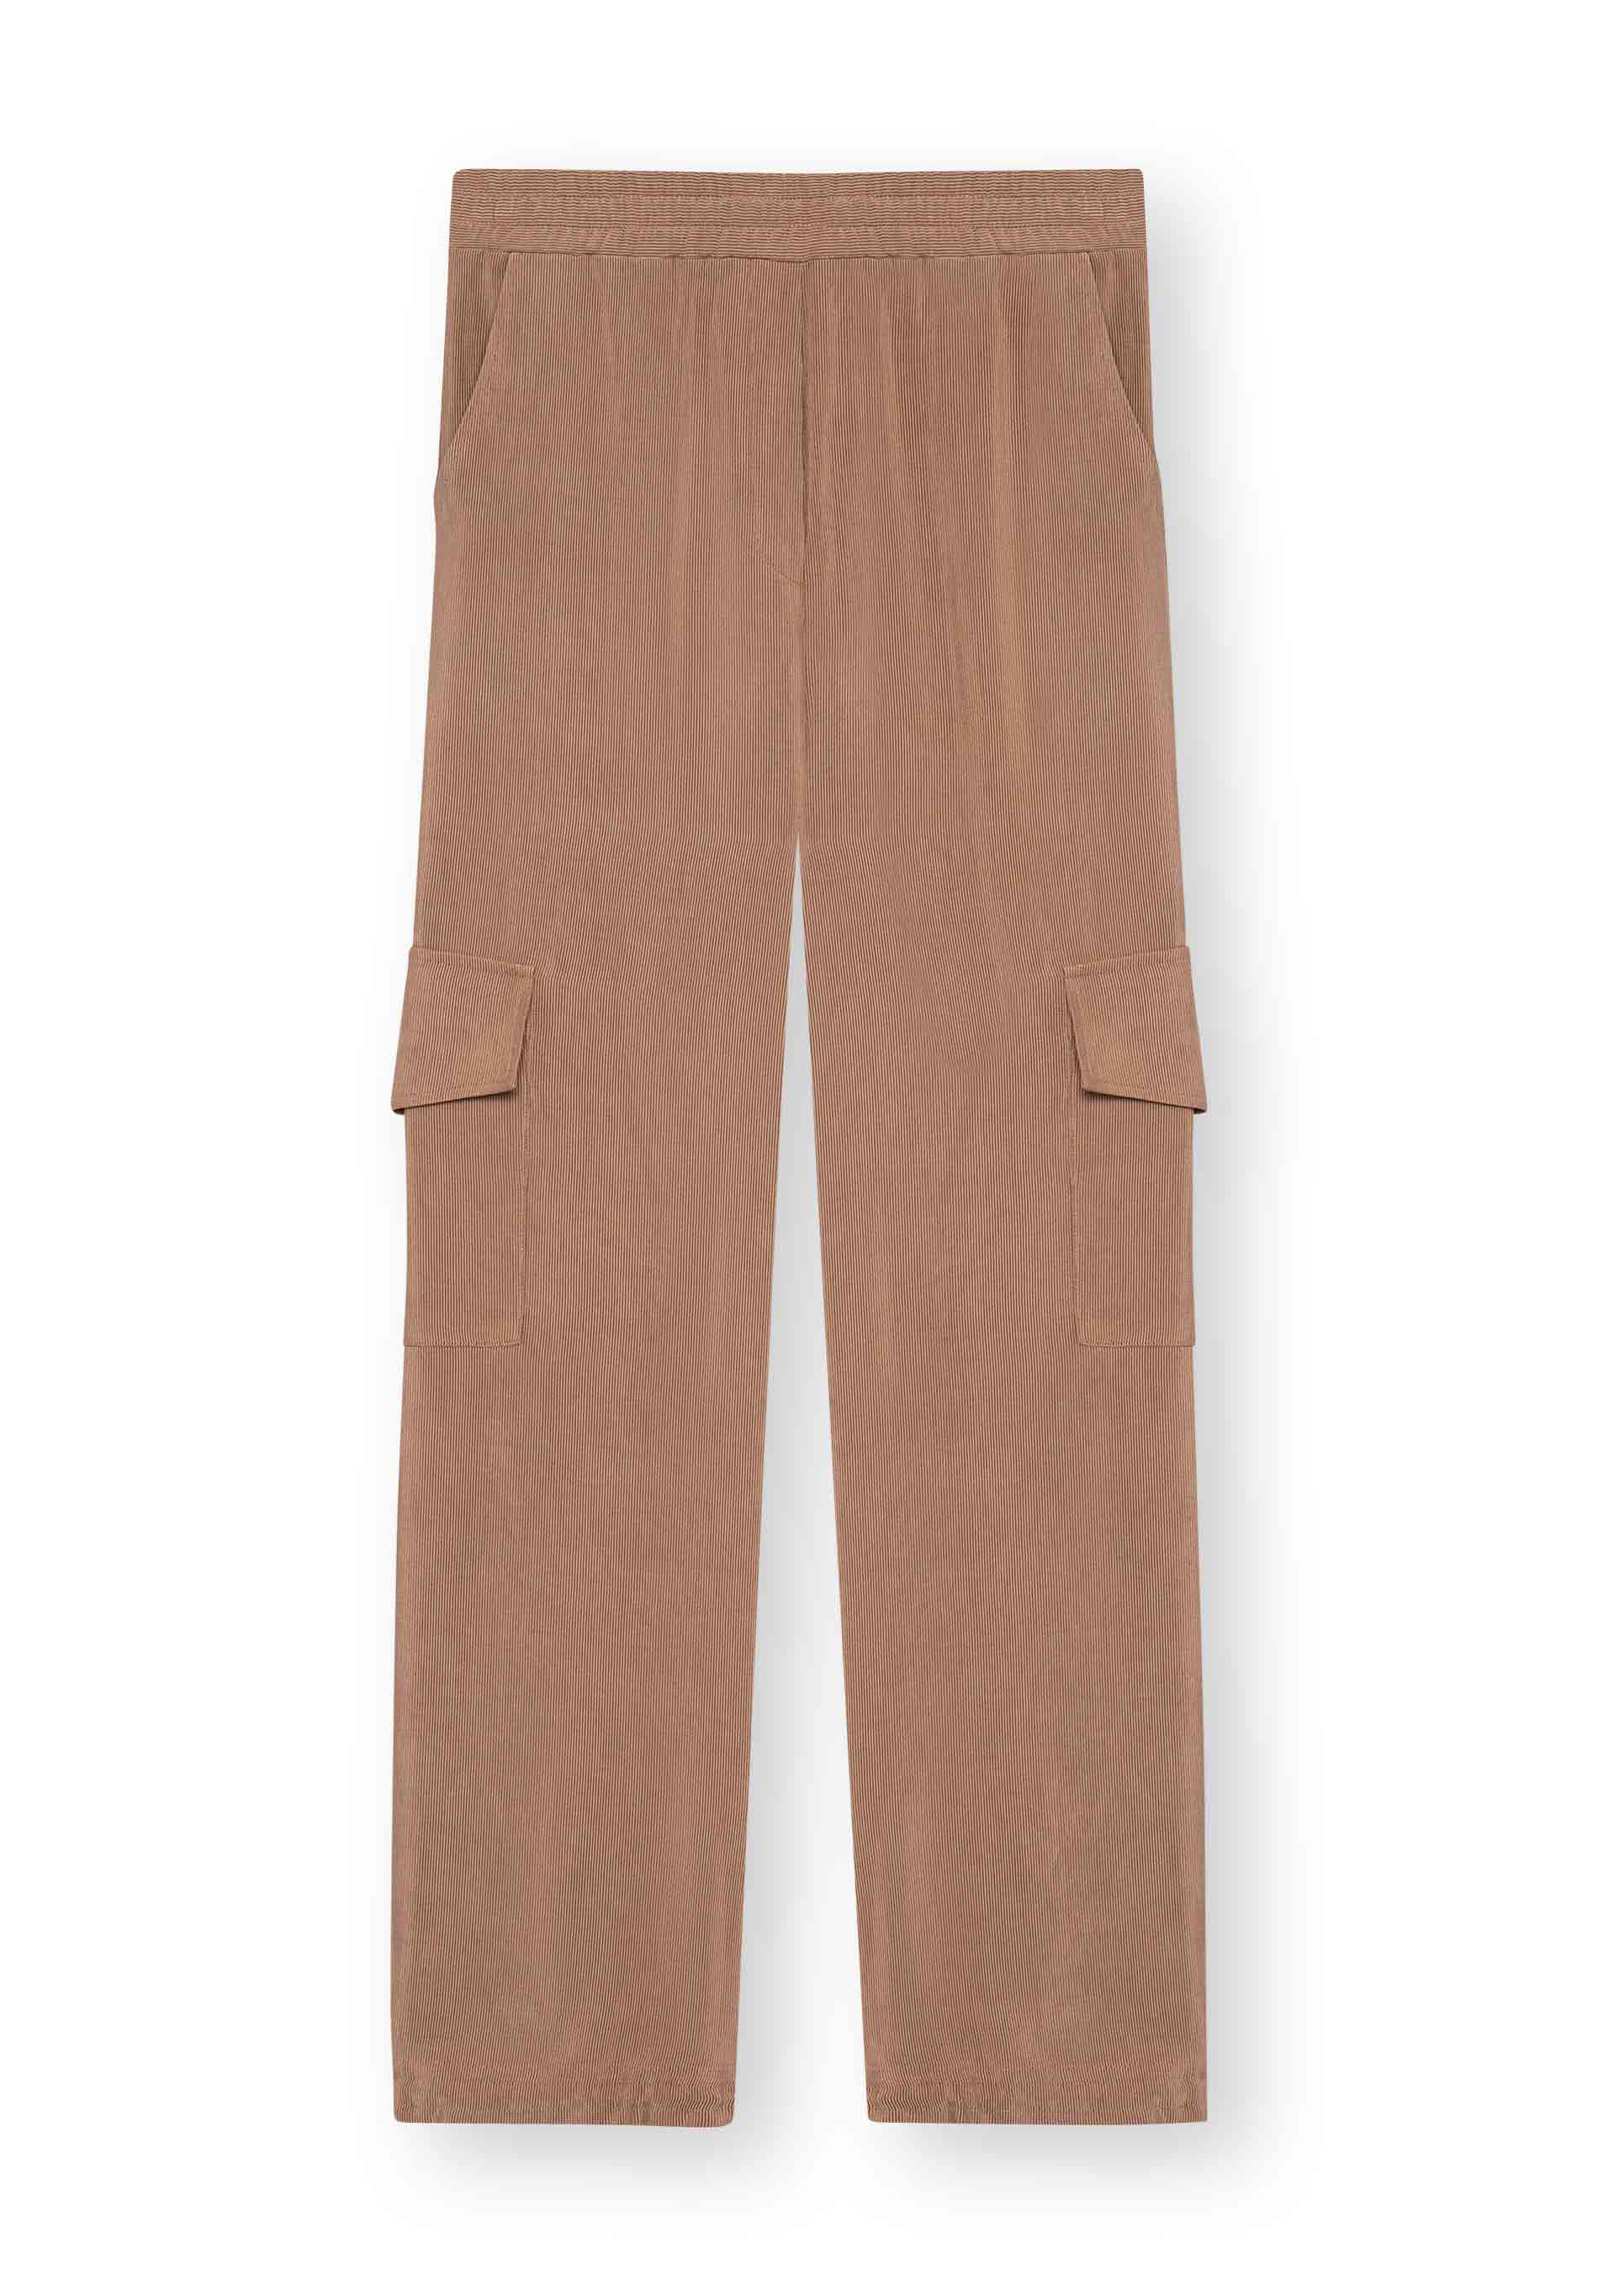 HEDIE rose-colored trousers by LOVJOI made of Ecovero™